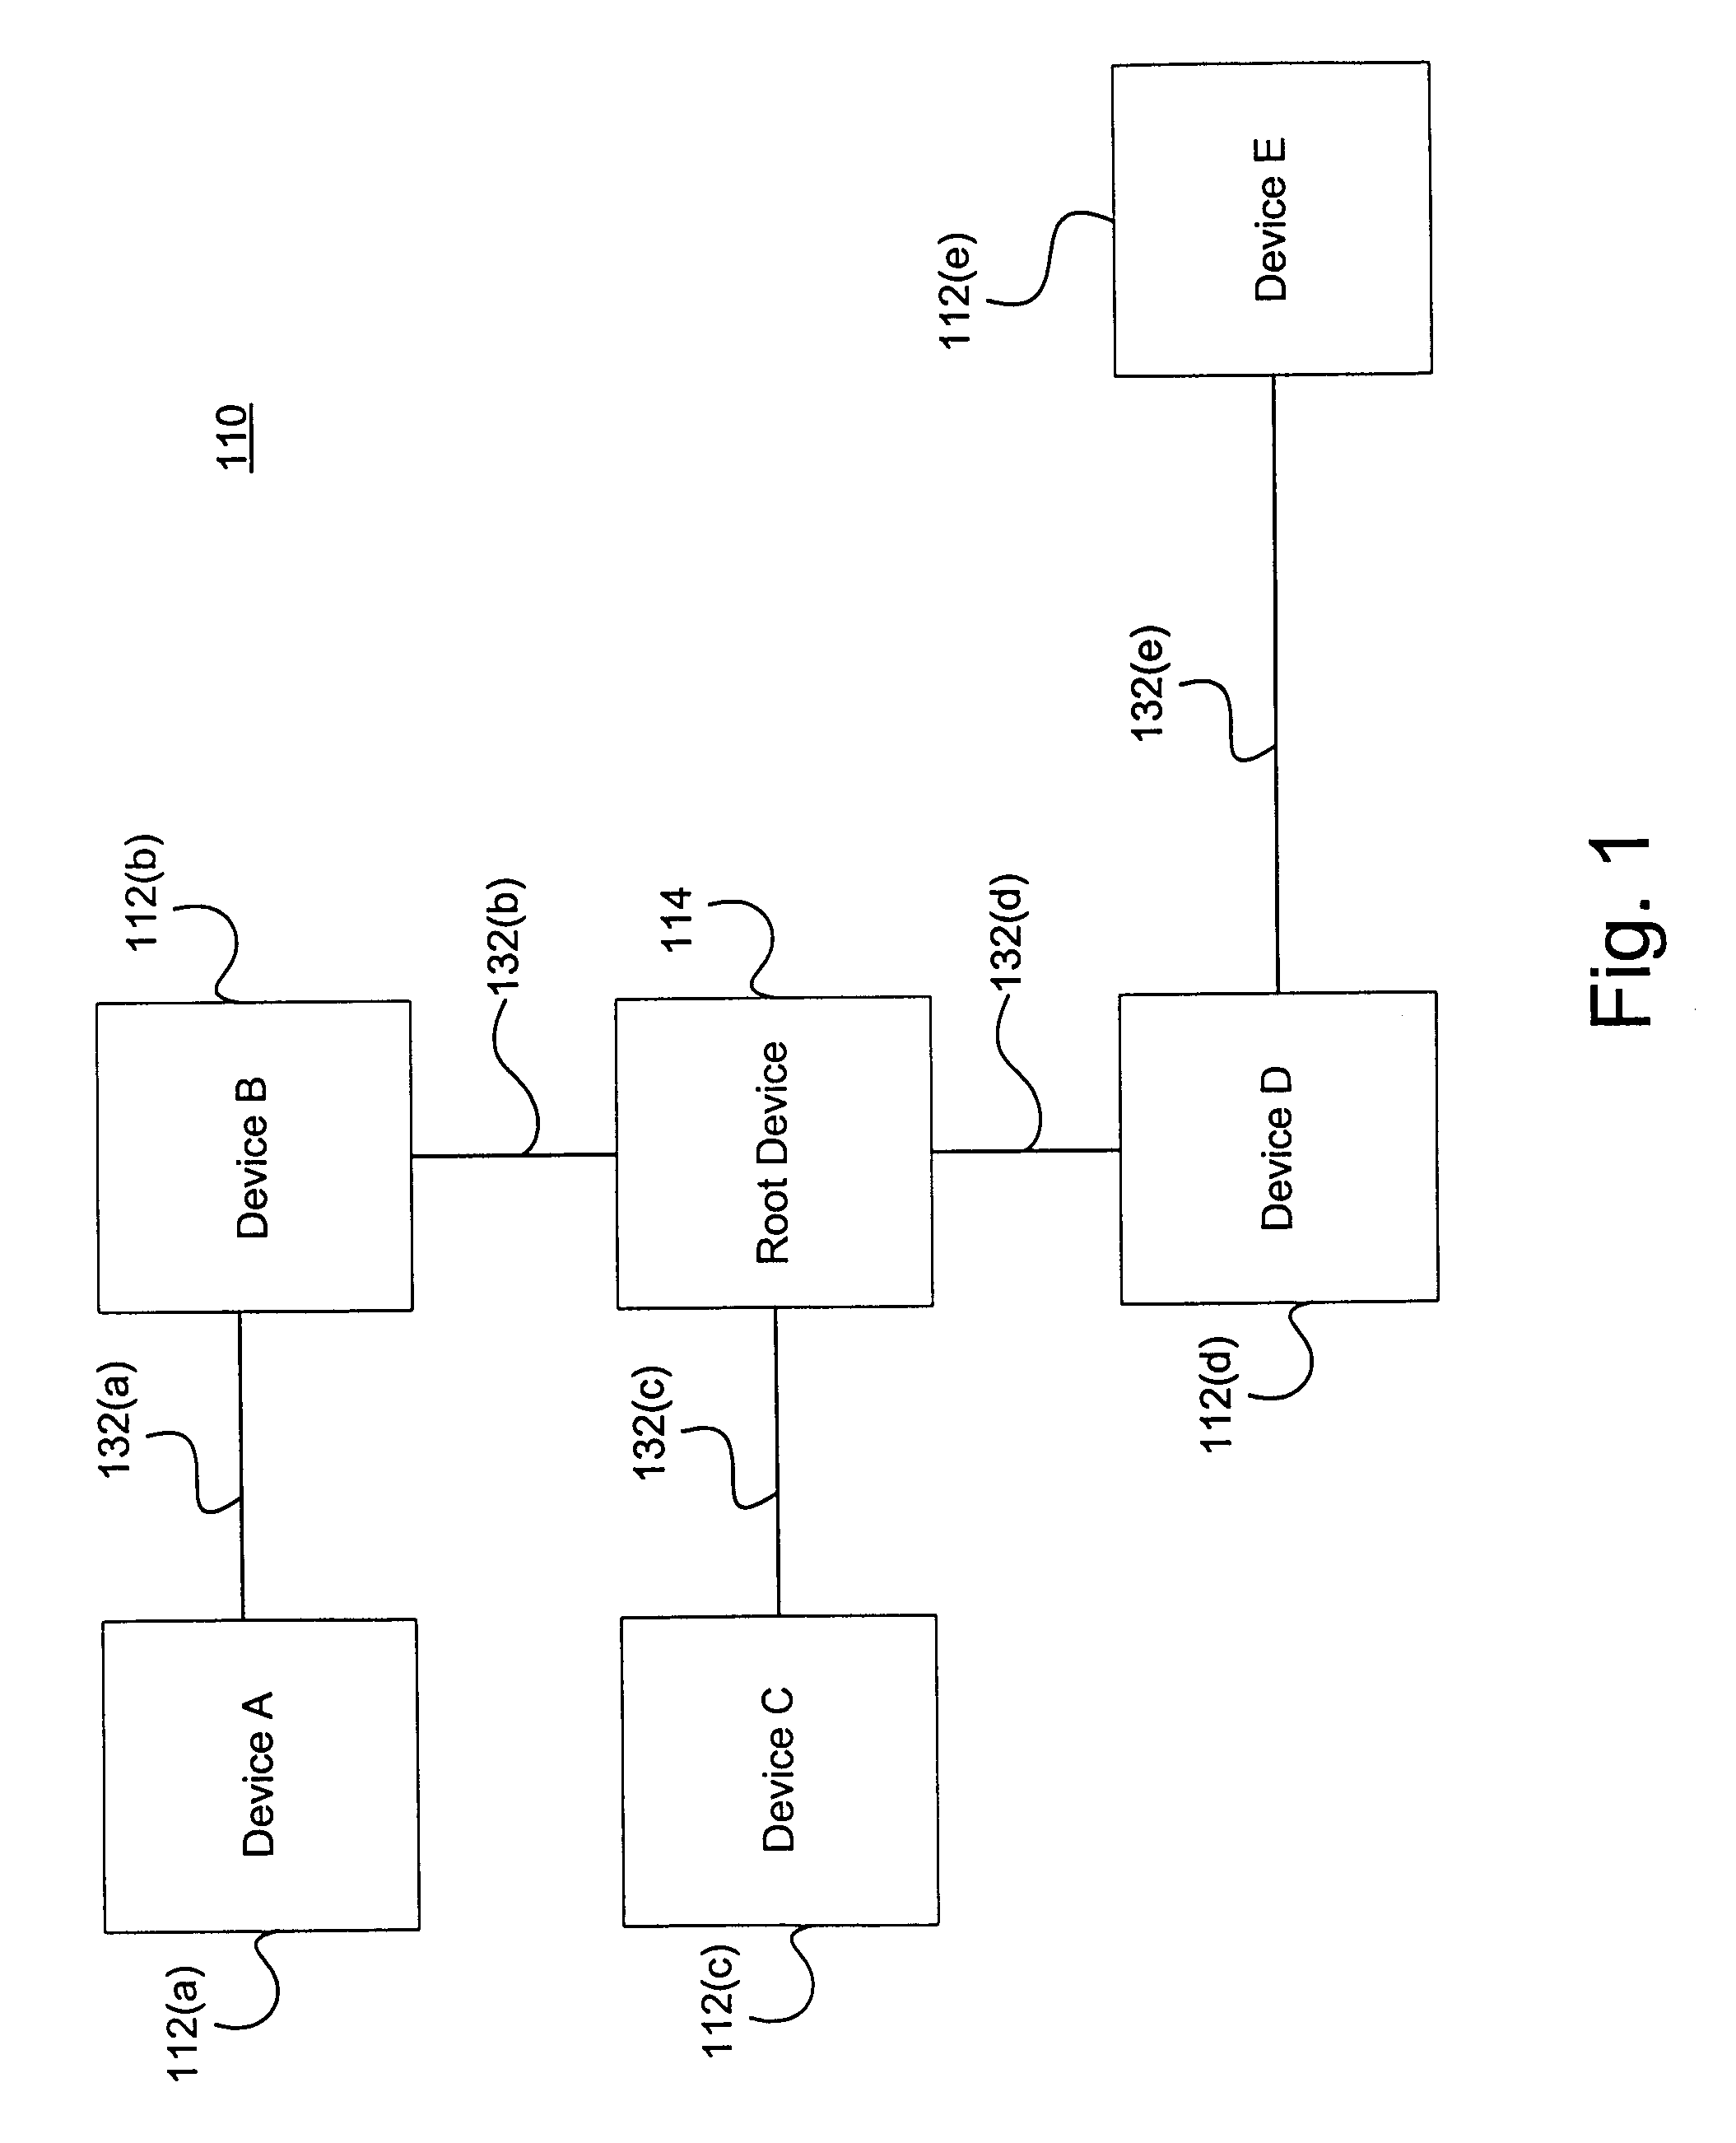 Method for implementing a multi-level system model for deterministically handling selected data